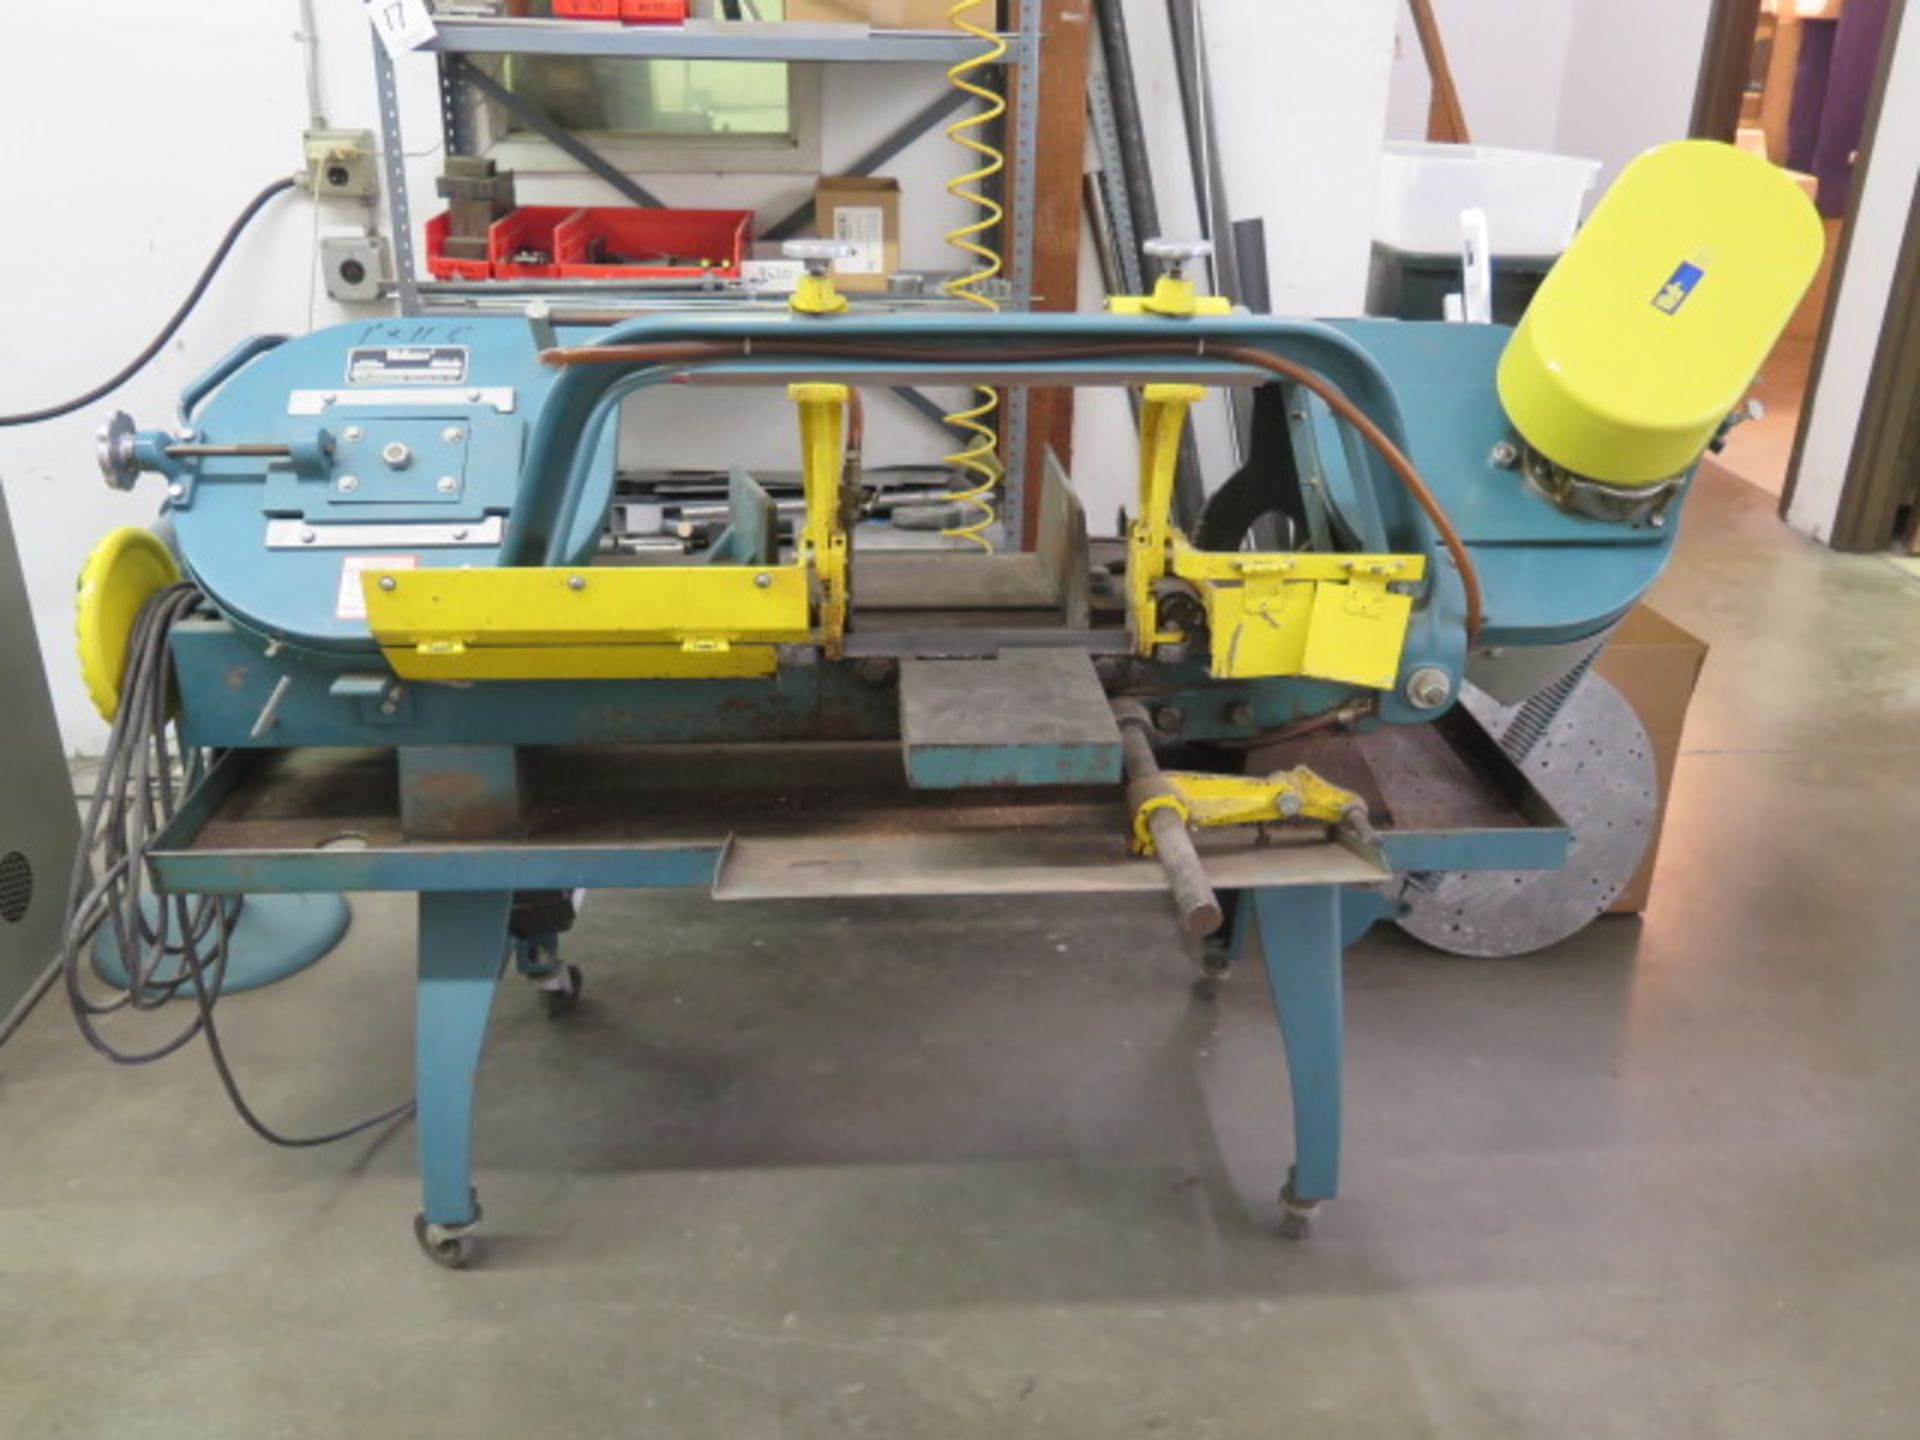 Wellsaw mdl. 850 10" Horizontal Miter Band Saw s/n 2925 w/ Manual Clamping, Work Stop